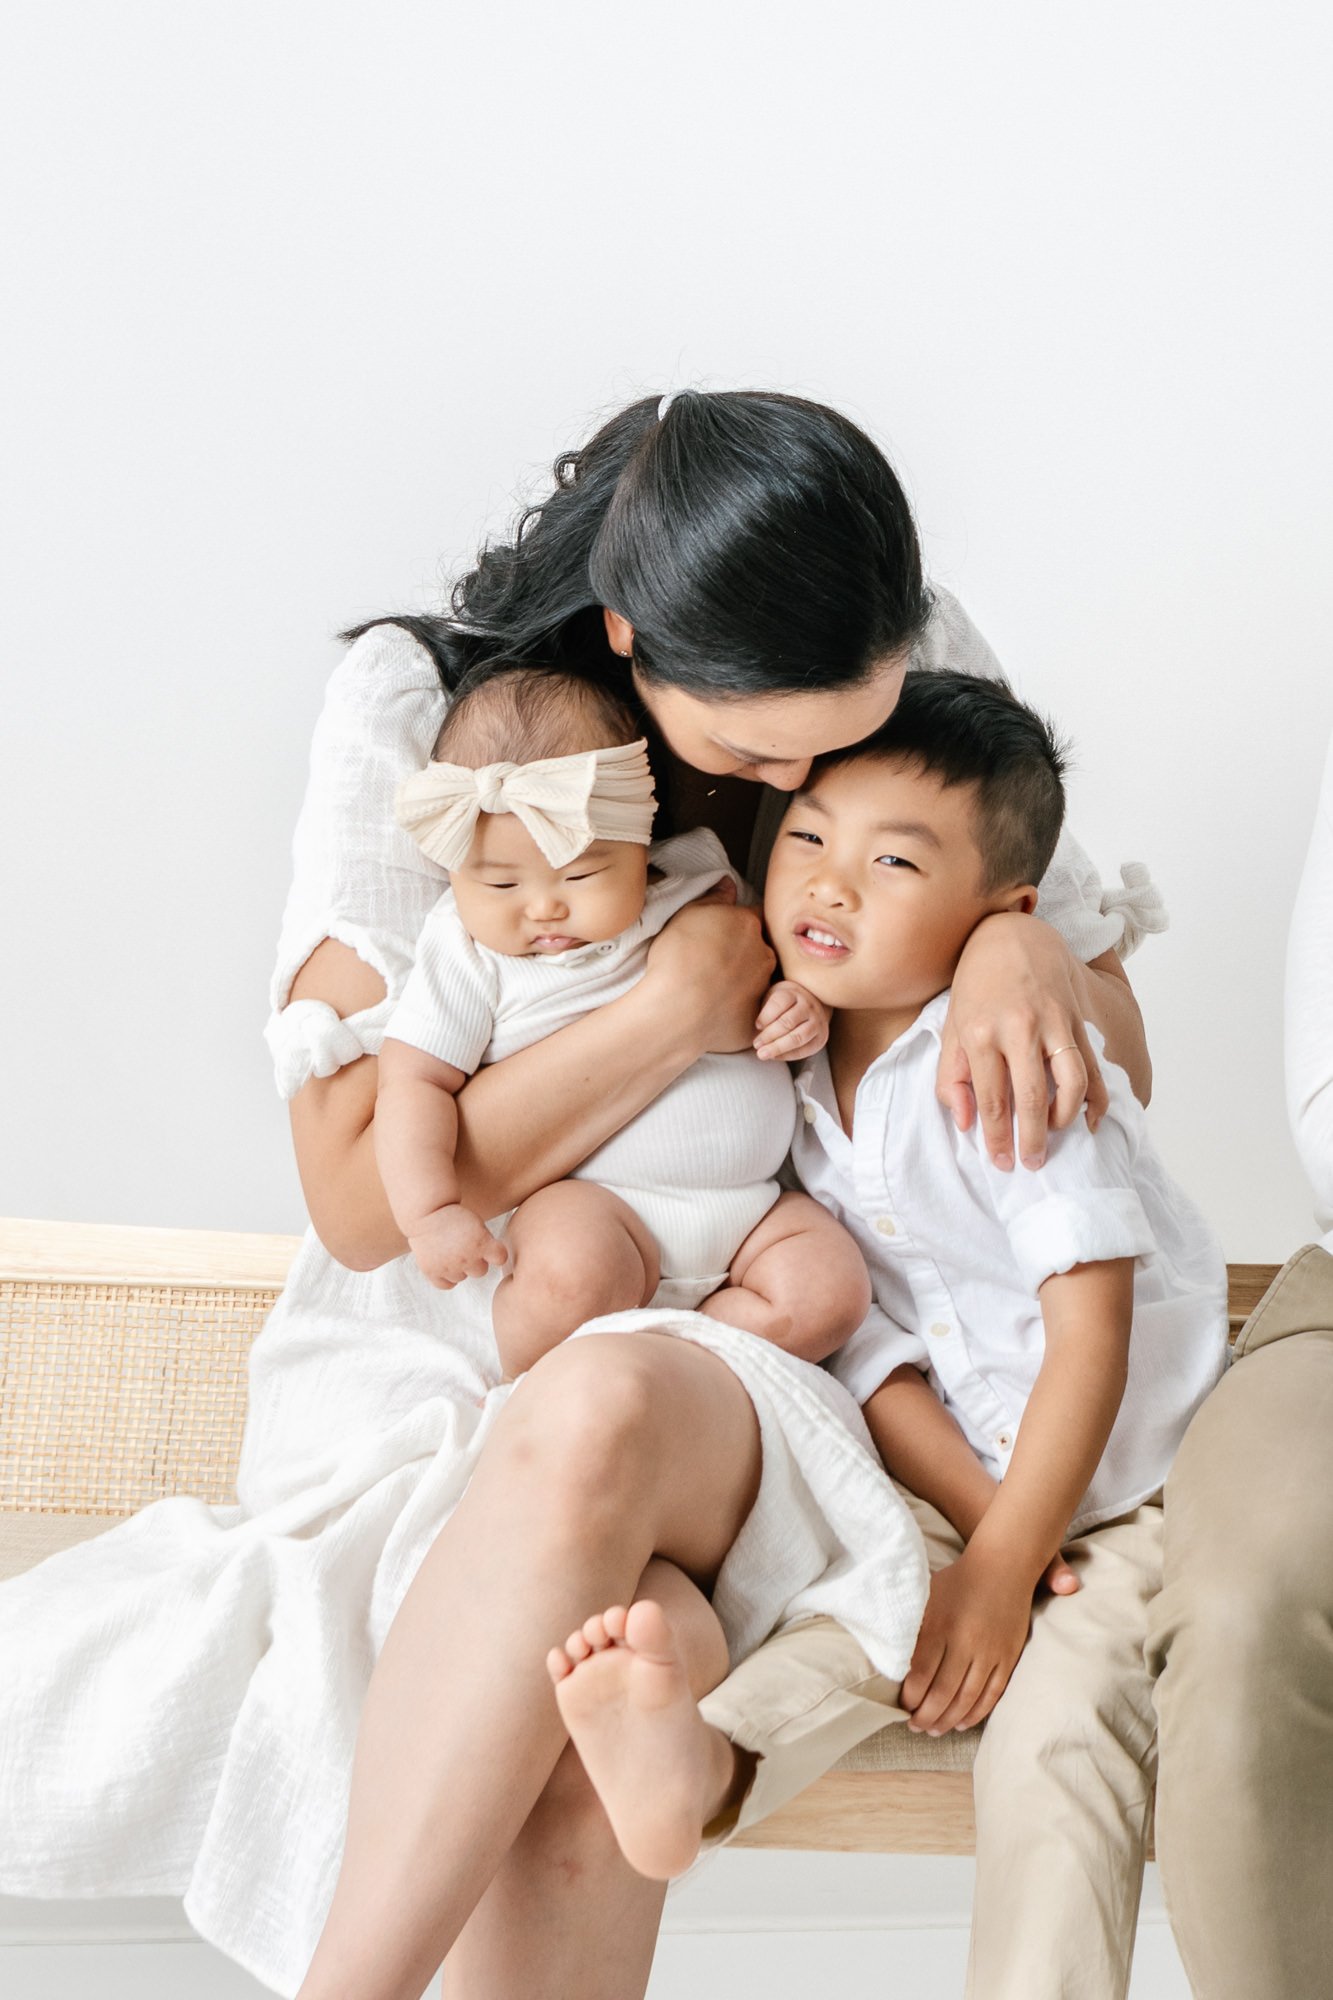    Sweet mother embraces two of her children. Holds baby on her lap and embraces son with one arm. All are dressed in white during Nicole Hawkins newborn photoshoot in New Jersey #studionewborns #studioportraits #babystudioportraits #NewJerseyPhotogr